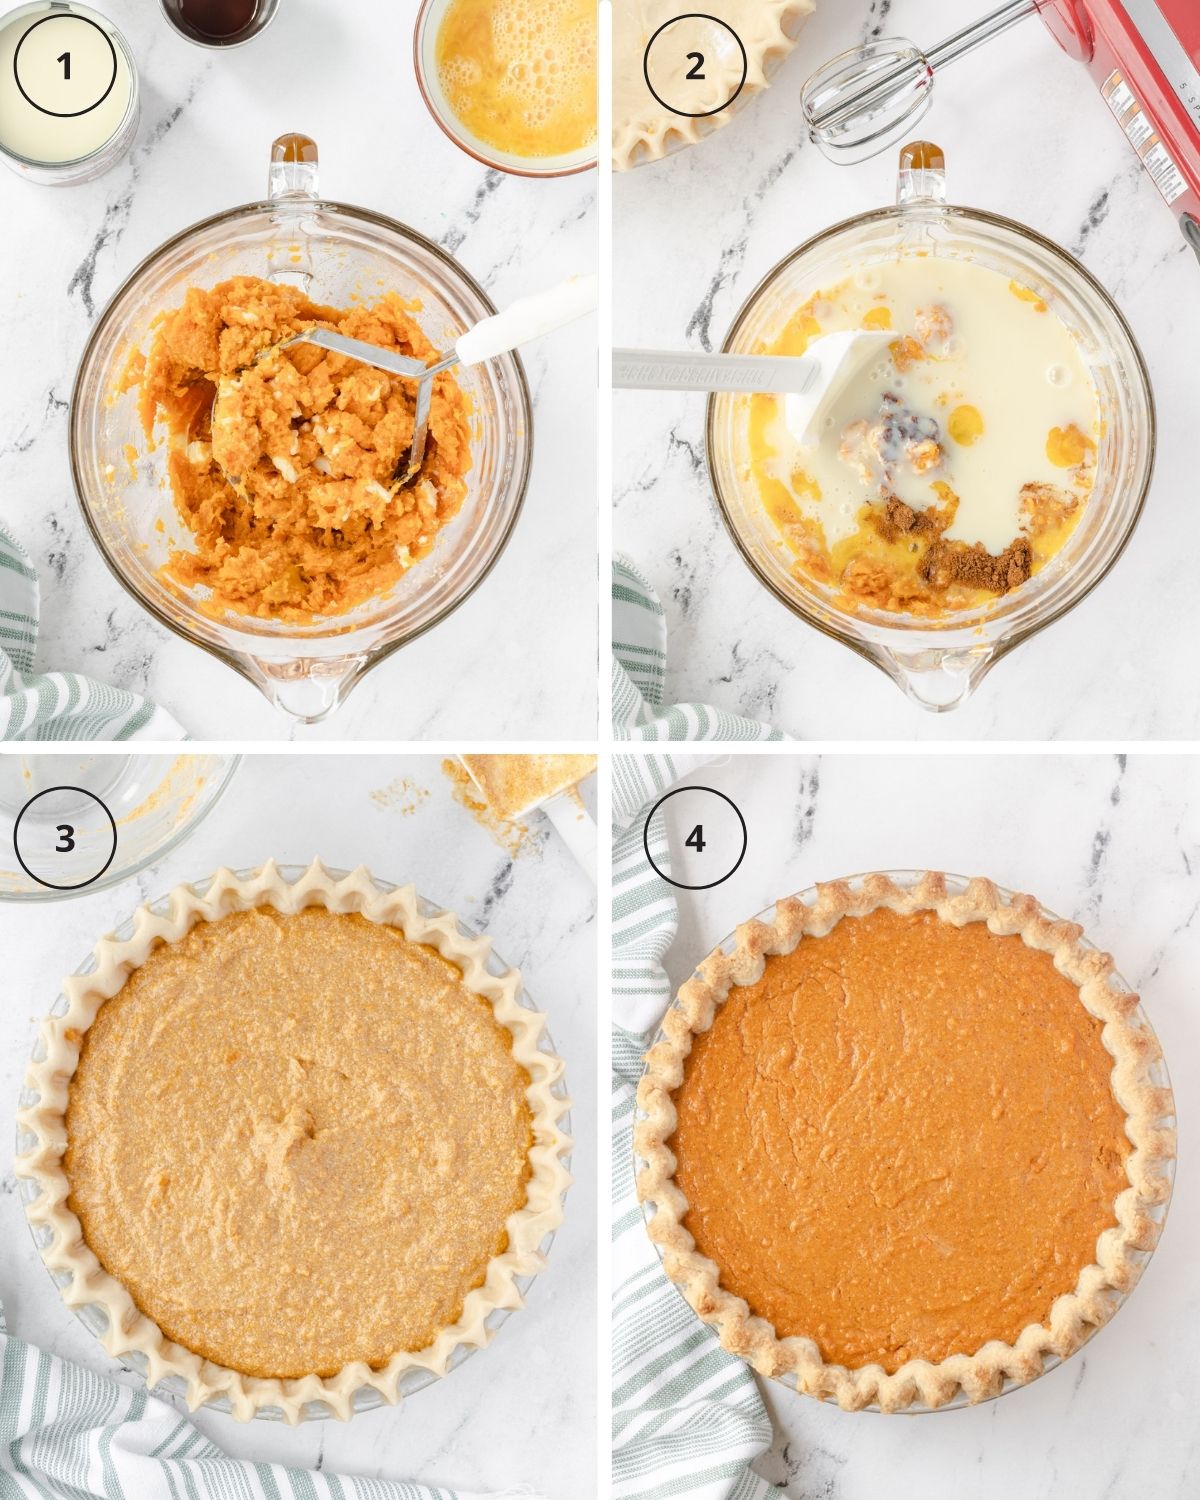 Step-by-step photo collage showing 1) mashing potatoes, 2) mixing all ingredients, 3) unbaked filling in pie, 4) baked pie.